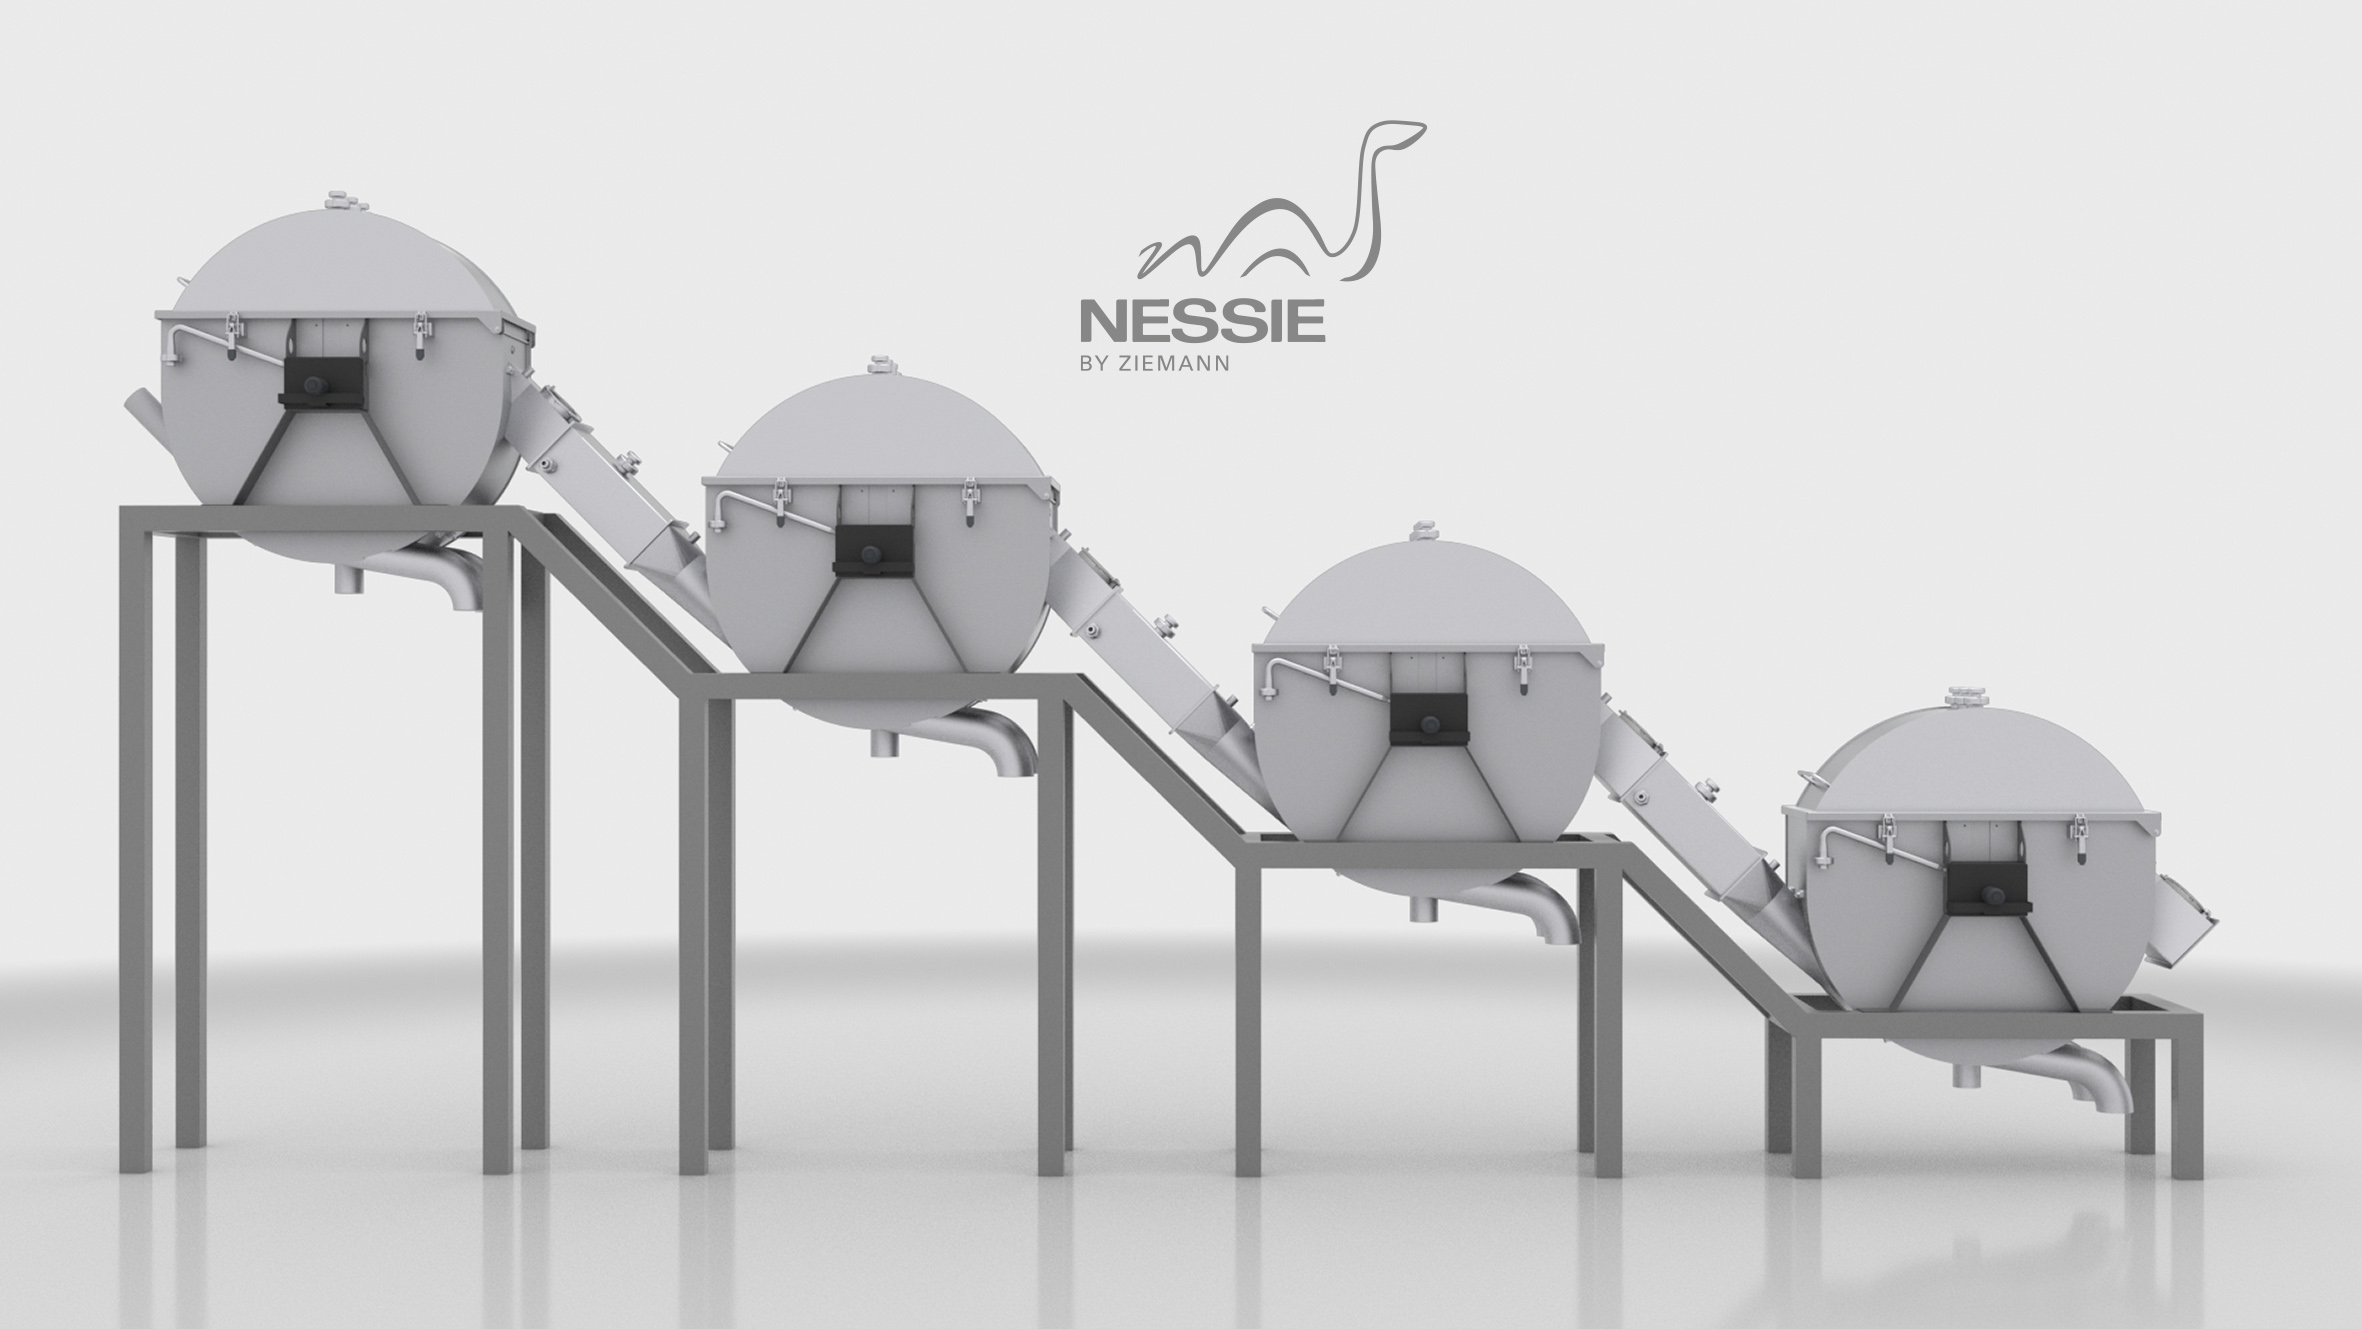 Also convincing in whisky production – the dynamic mash filtration system NESSIE by ZIEMANN.